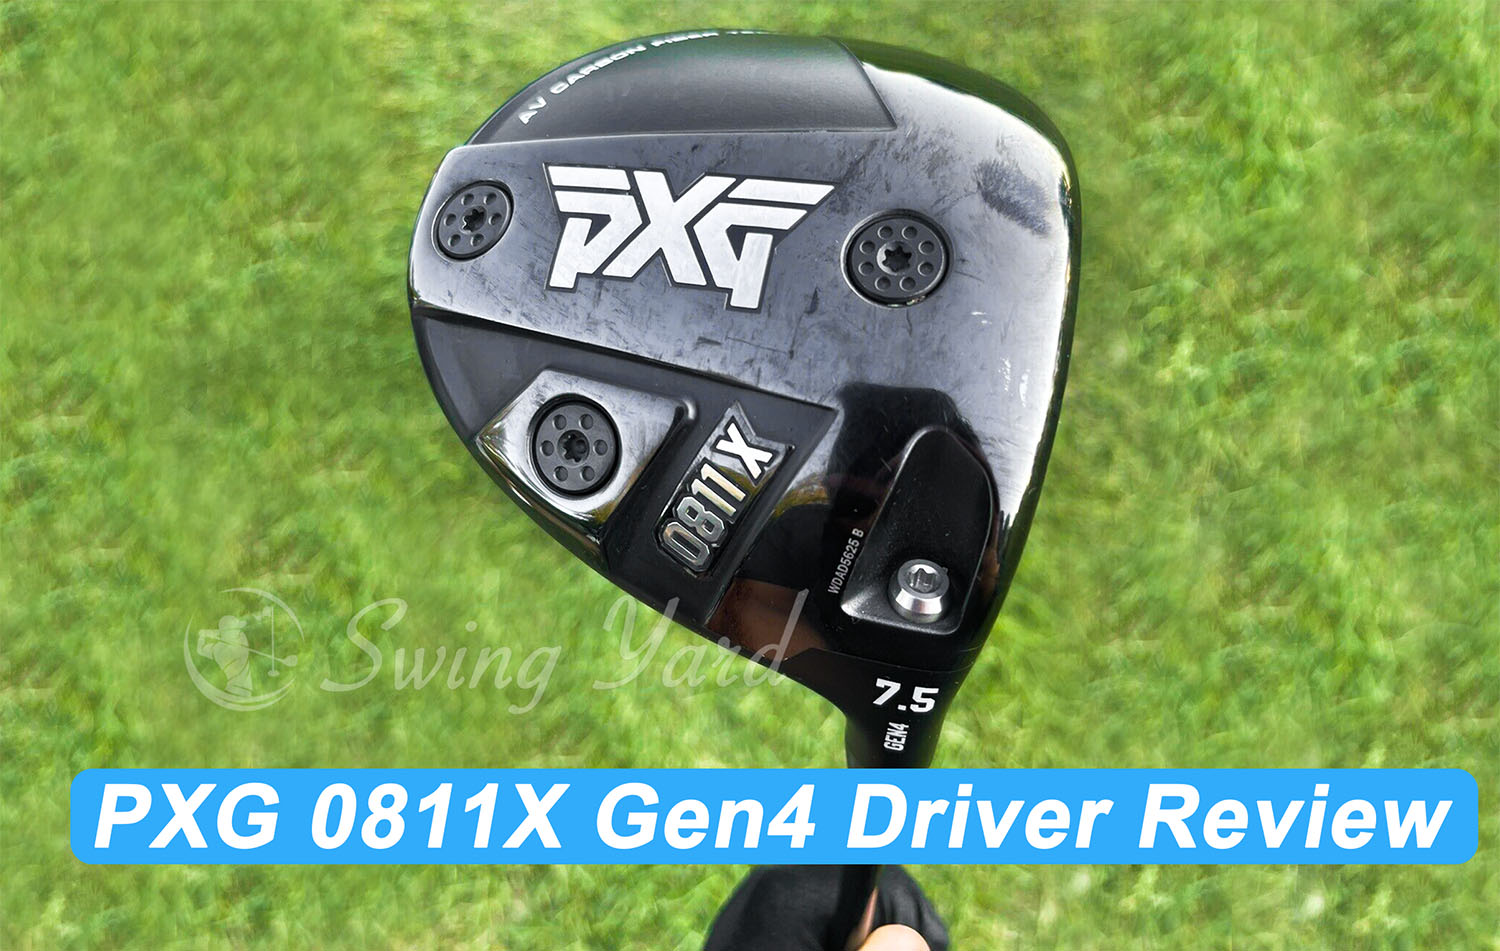 Photo of me holding the PXG 0811X Gen4 Driver